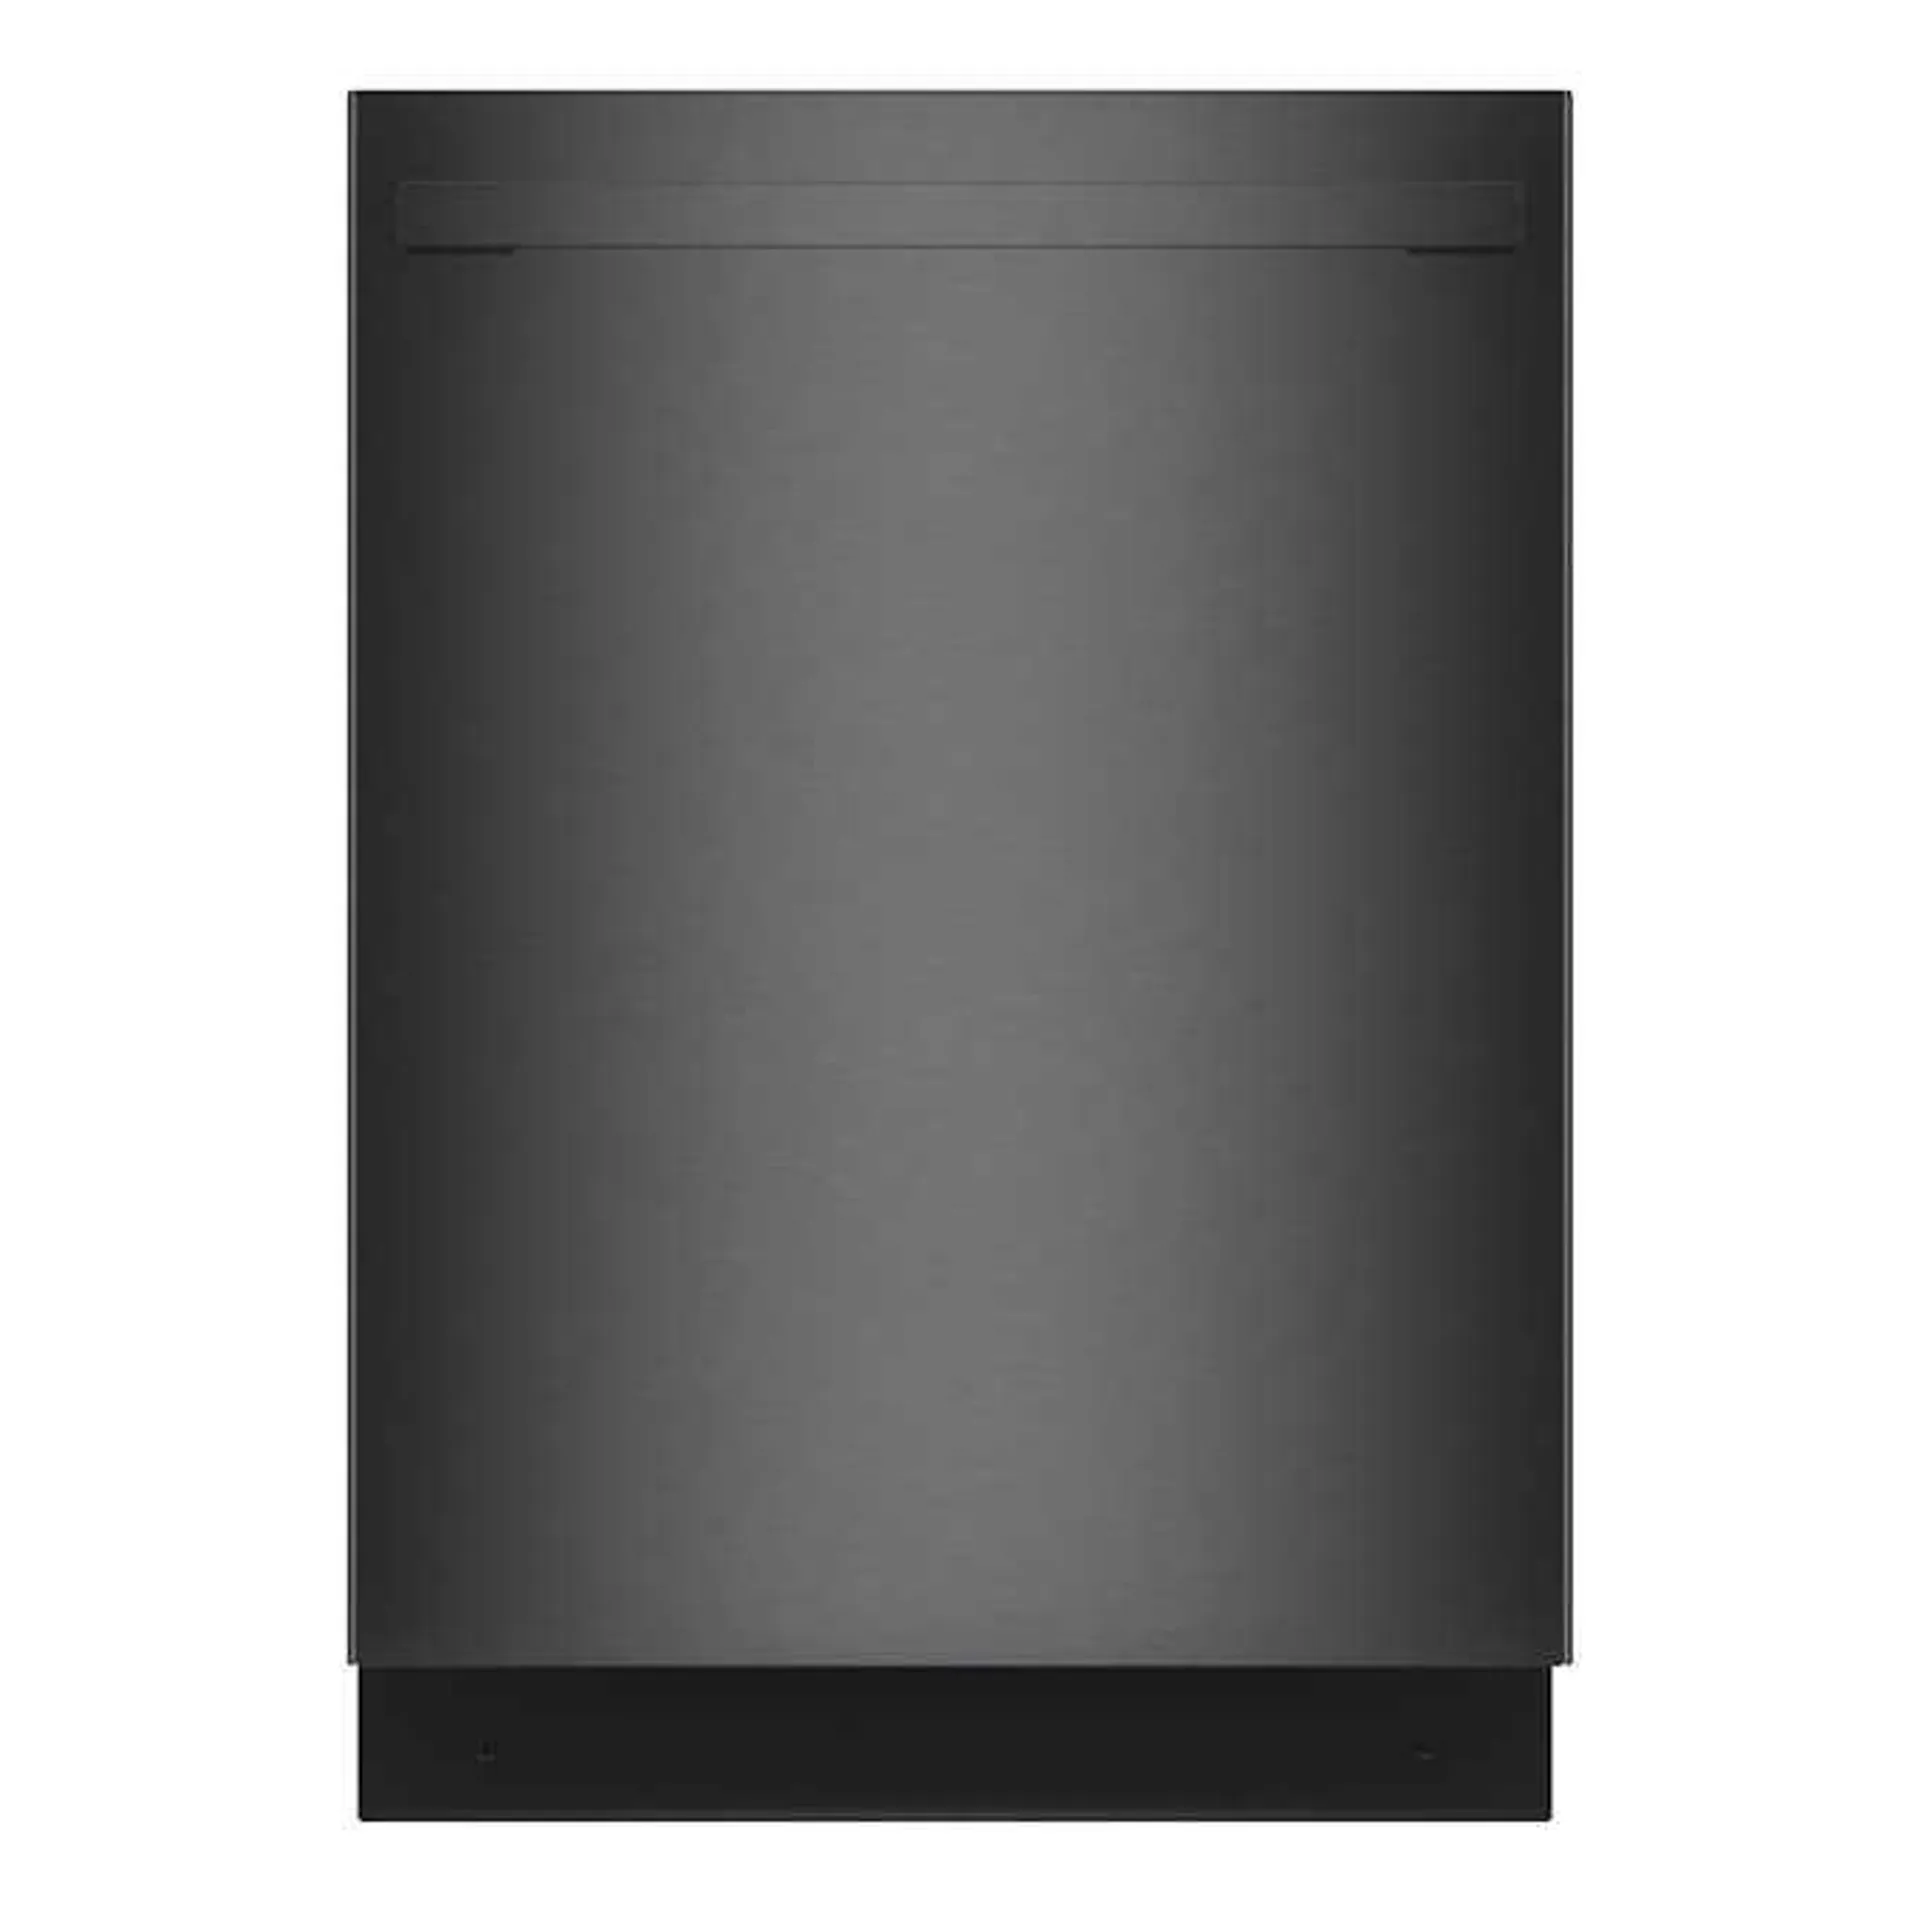 Bosch 100 Series 24 in Built-In Dishwasher with 3rd Rack